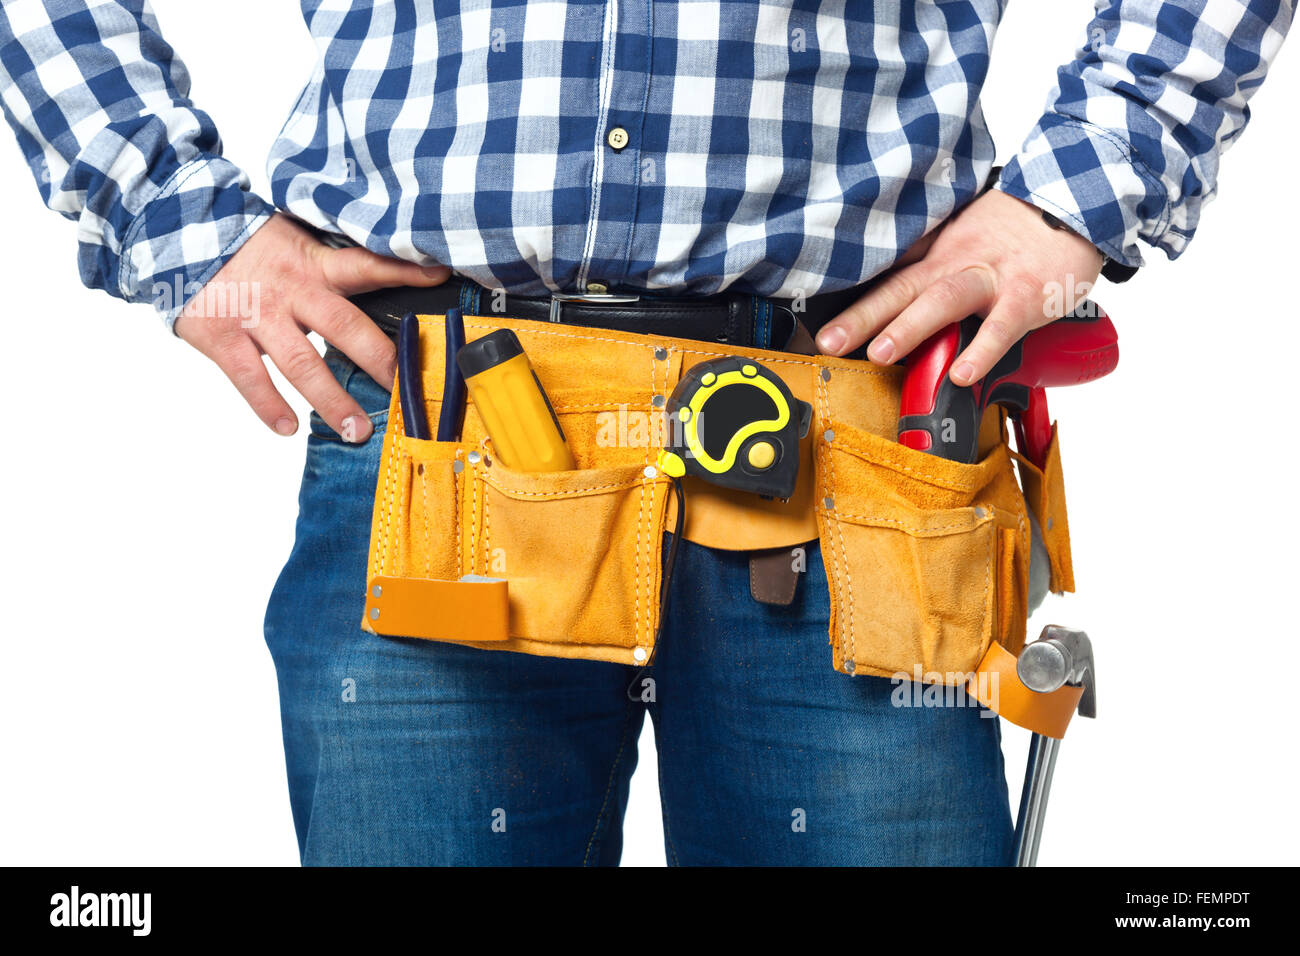 Construction builder tools and belt midsection isolated on white background. Stock Photo